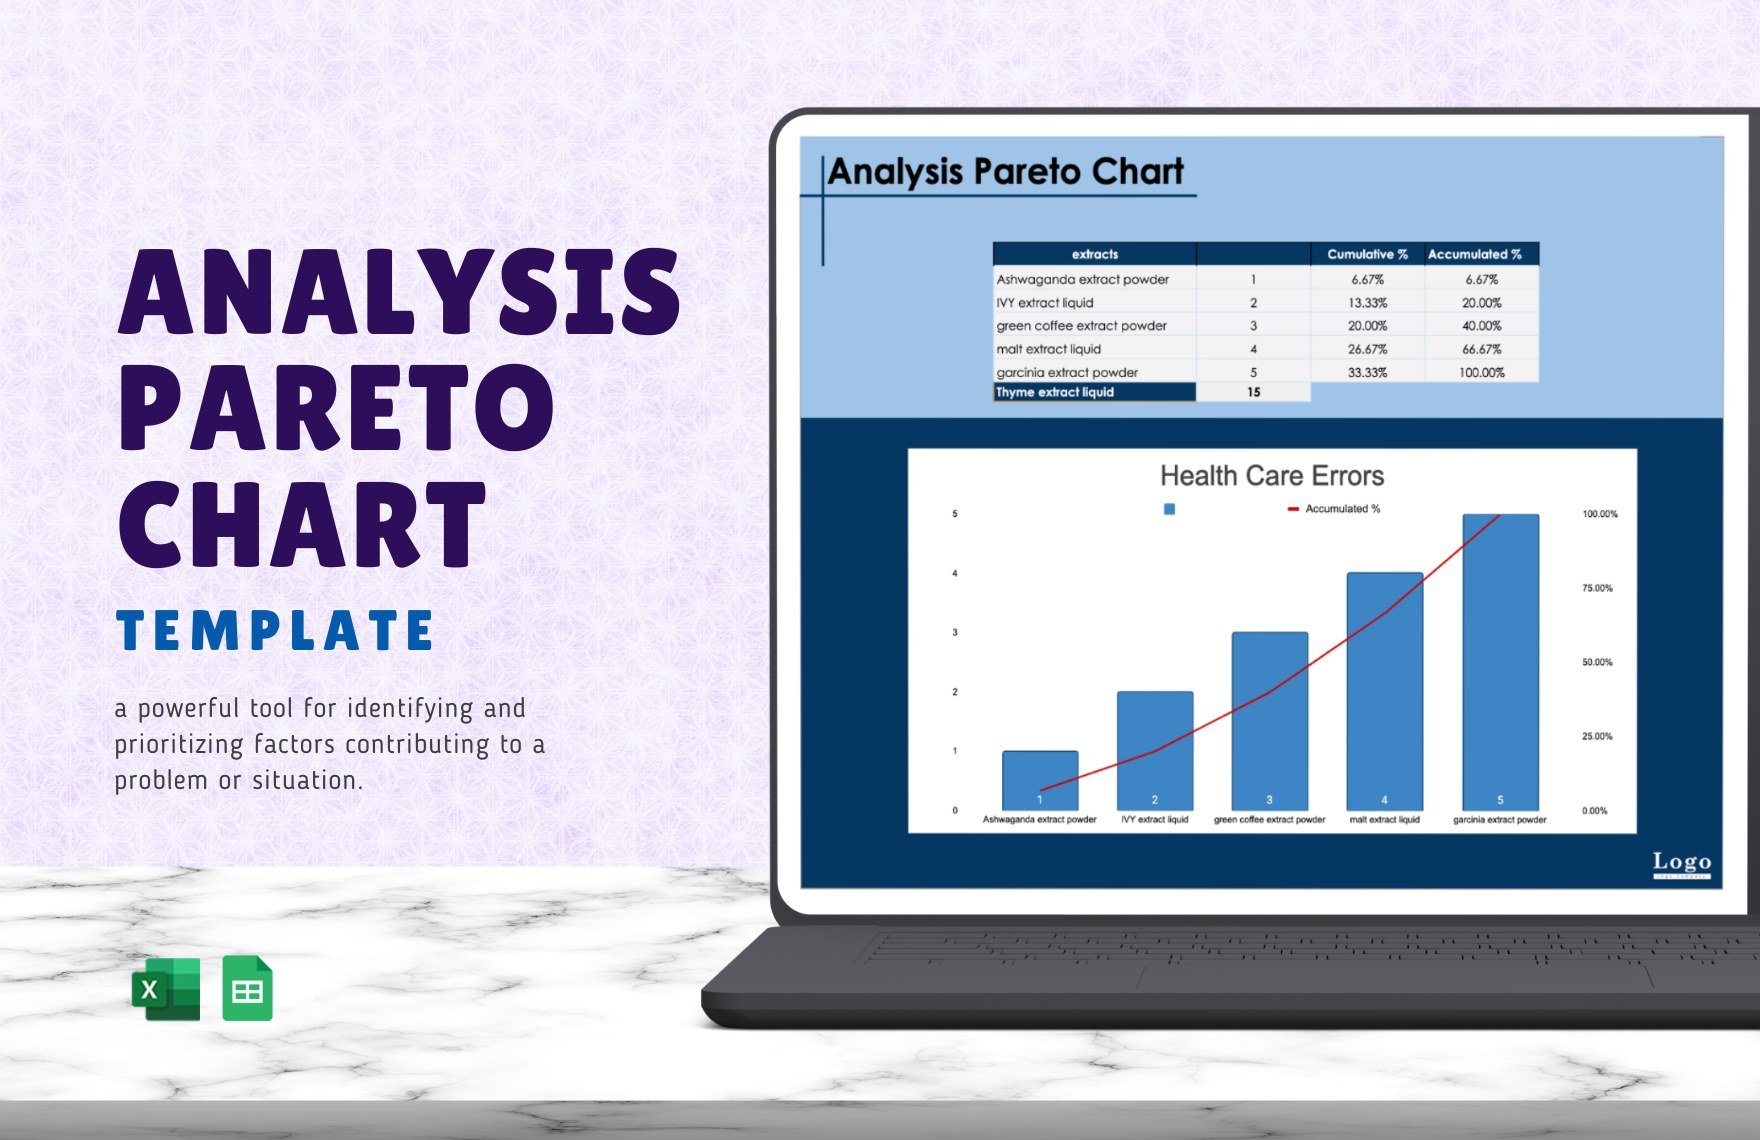 Analysis Pareto Chart Template in Excel, Google Sheets